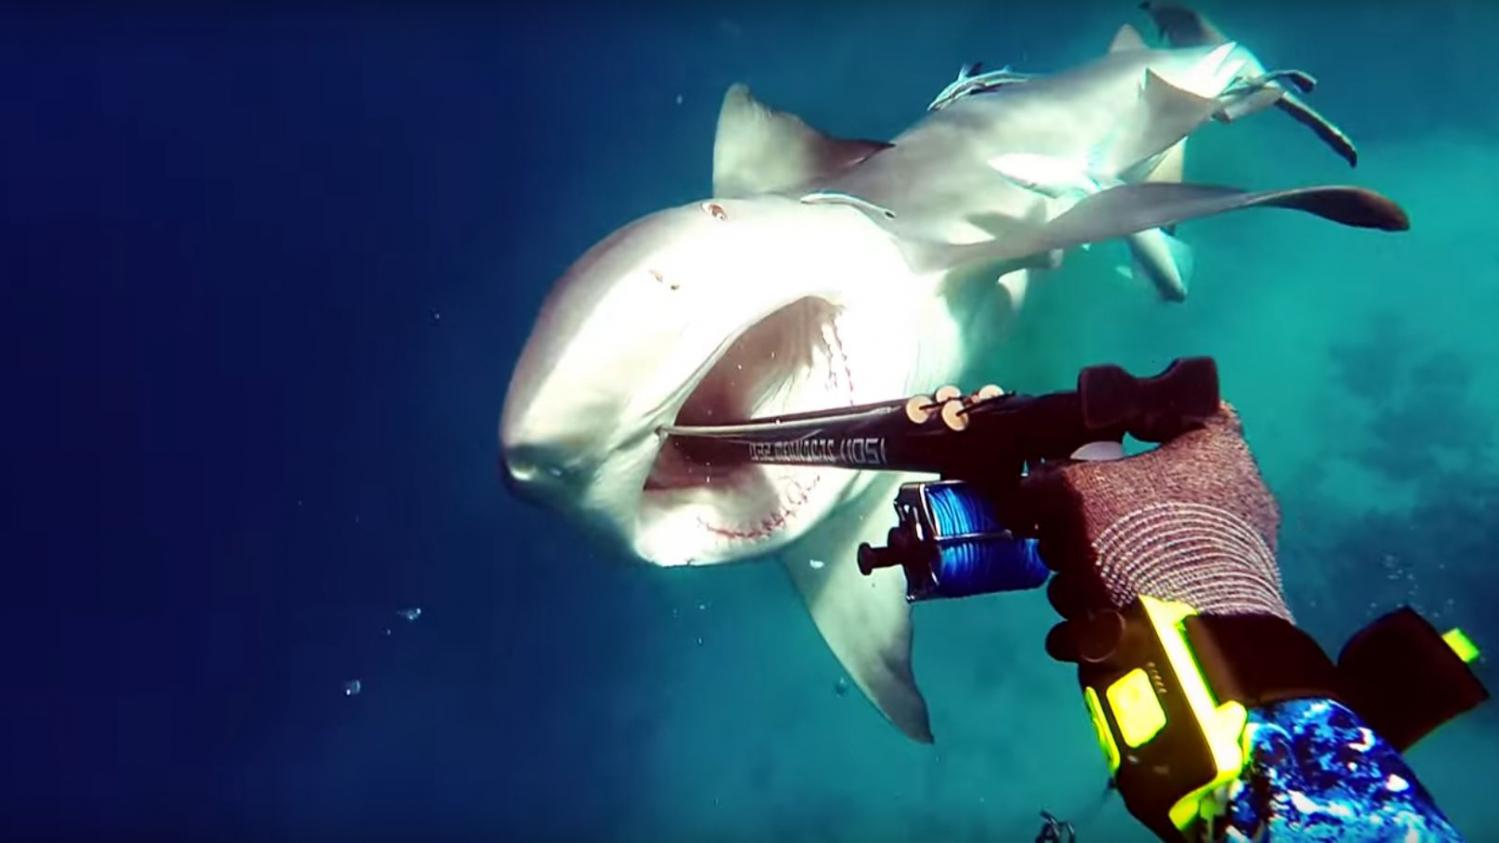 British diver stalked by shark for hours